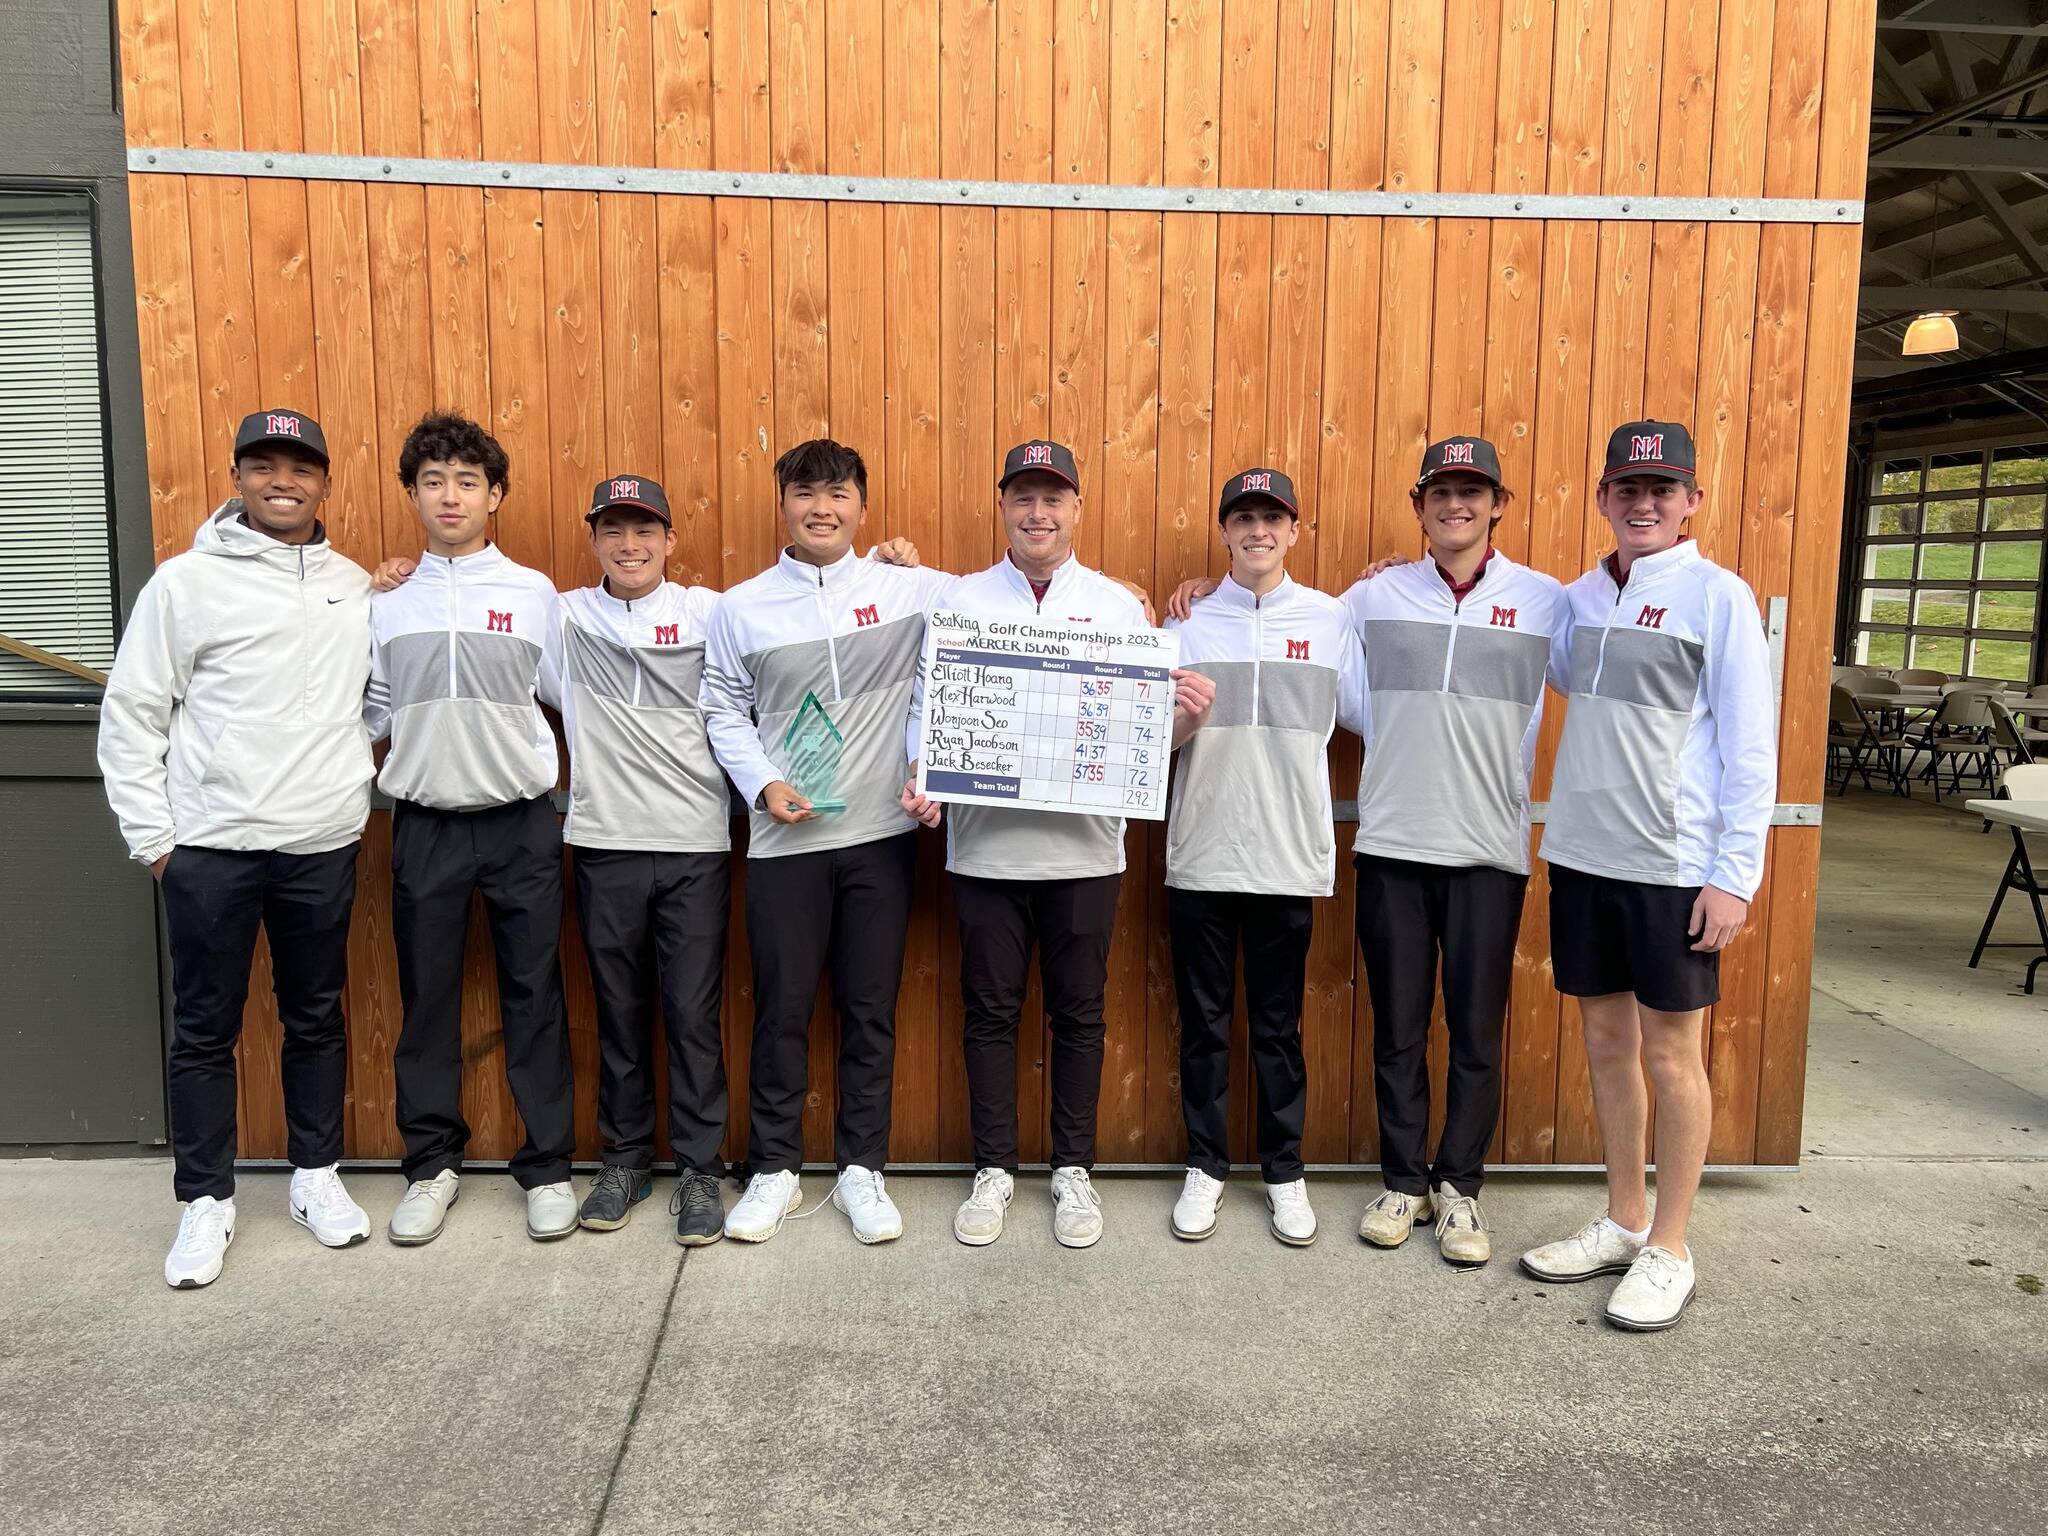 Mercer Island High School’s boys golf team advanced to the state championship in May by winning the recent 3A District 2 Tournament. The Islanders shot 292 as a team, which is four-over par, to win the tournament. Elliott Hoang (First-Team All-KingCo) shot a one-under 71 and finished tied for fourth. Jack Besecker shot an even 72 and finished tied for seventh. Wonjoon Seo (Second-Team All-KingCo) shot a two-over 74 and finished tied for ninth. Alex Harwood (Second-Team All-KingCo) shot a three-over 75 and finished tied for 12th. Hoang birdied the 18th hole to tie Bellevue High for first, which sent it to a tiebreaker that the Islanders won by two shots behind the play of Ryan Jacobson (six-over 78, KingCo Honorable Mention). Photo courtesy of the Mercer Island School District